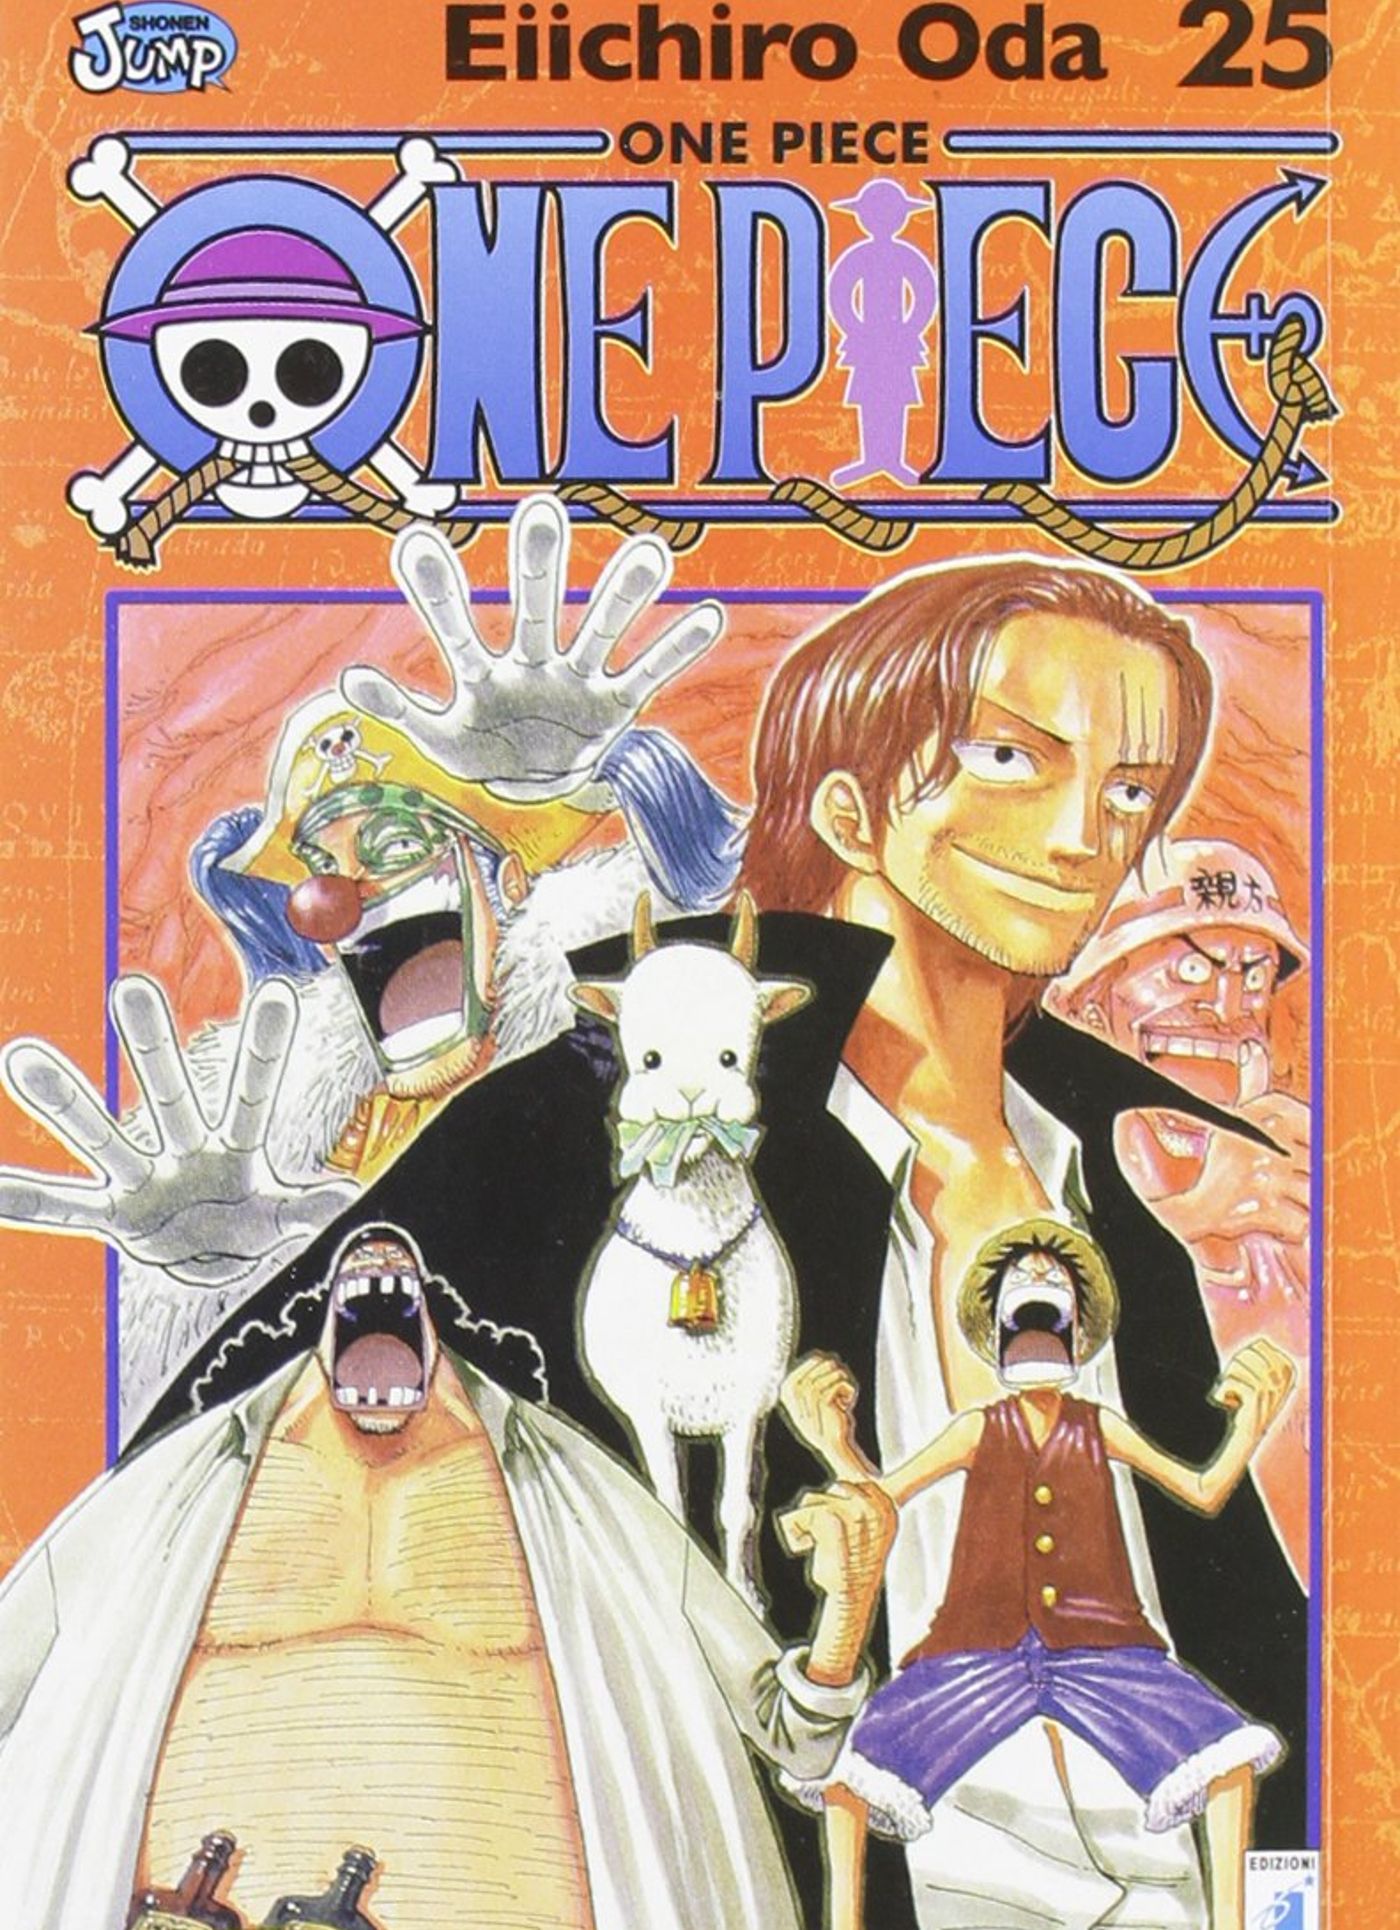 One-Piece-volume-25-cover- image